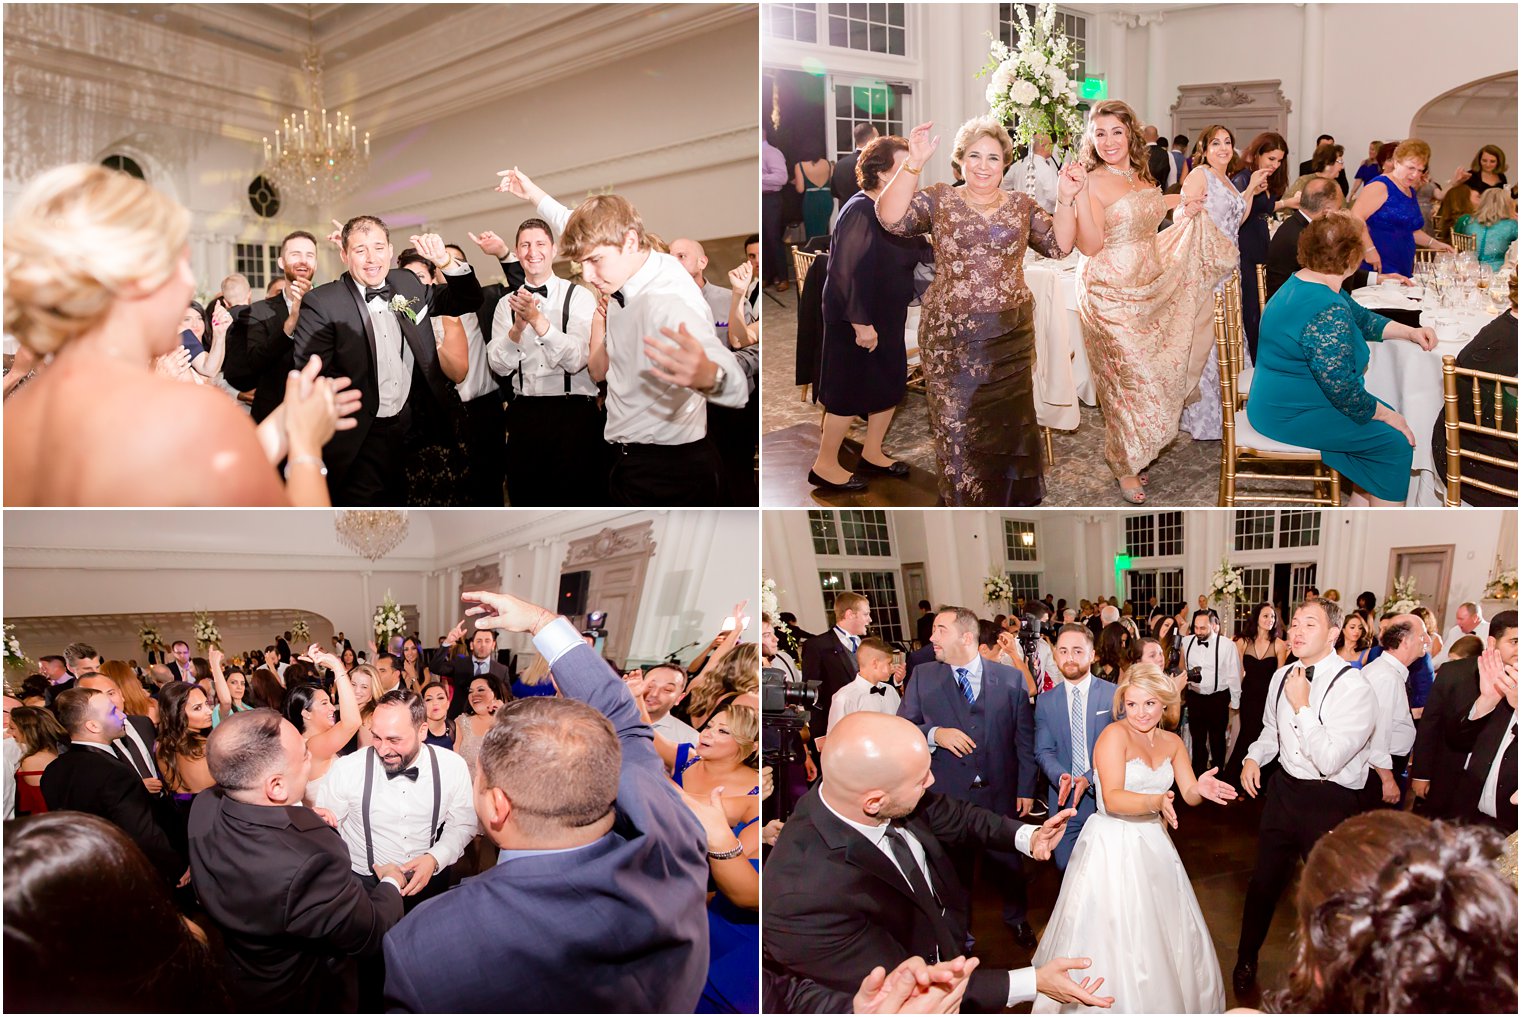 Wedding dancing photos at Park Chateau Estate and Gardens